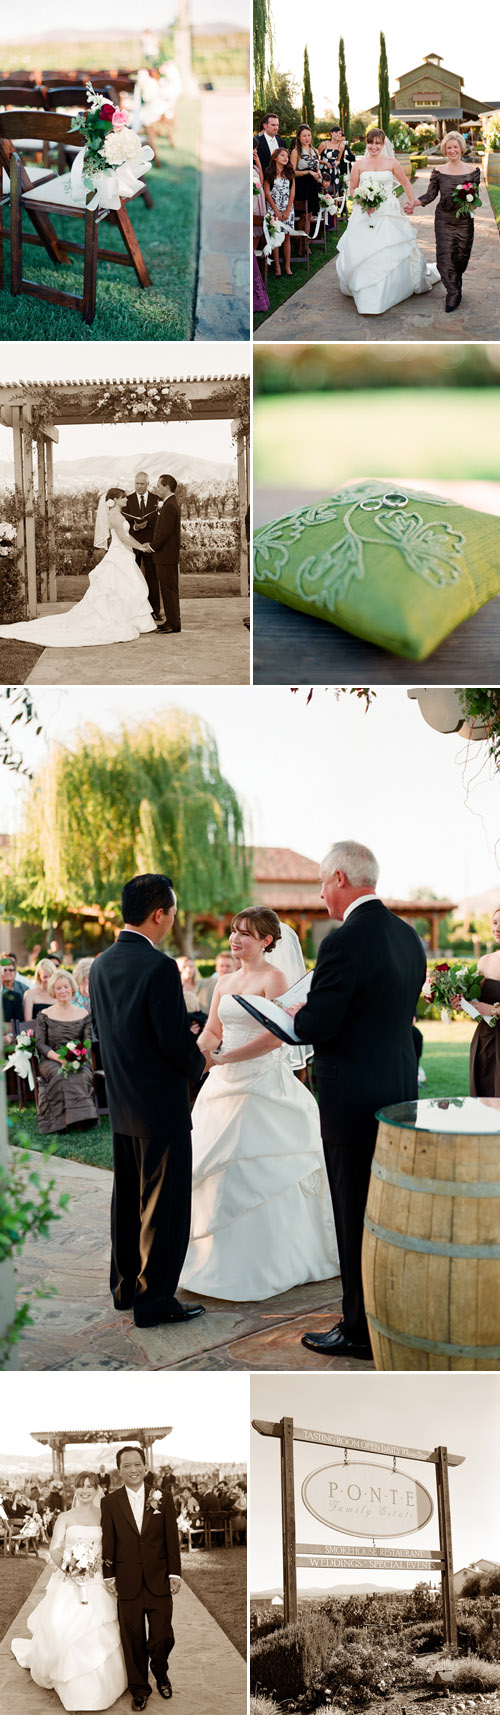 romantic fall vineyard wedding at the Ponte Family Estate Winery in Temecula, CA, photos by Ulrica Wihlborg